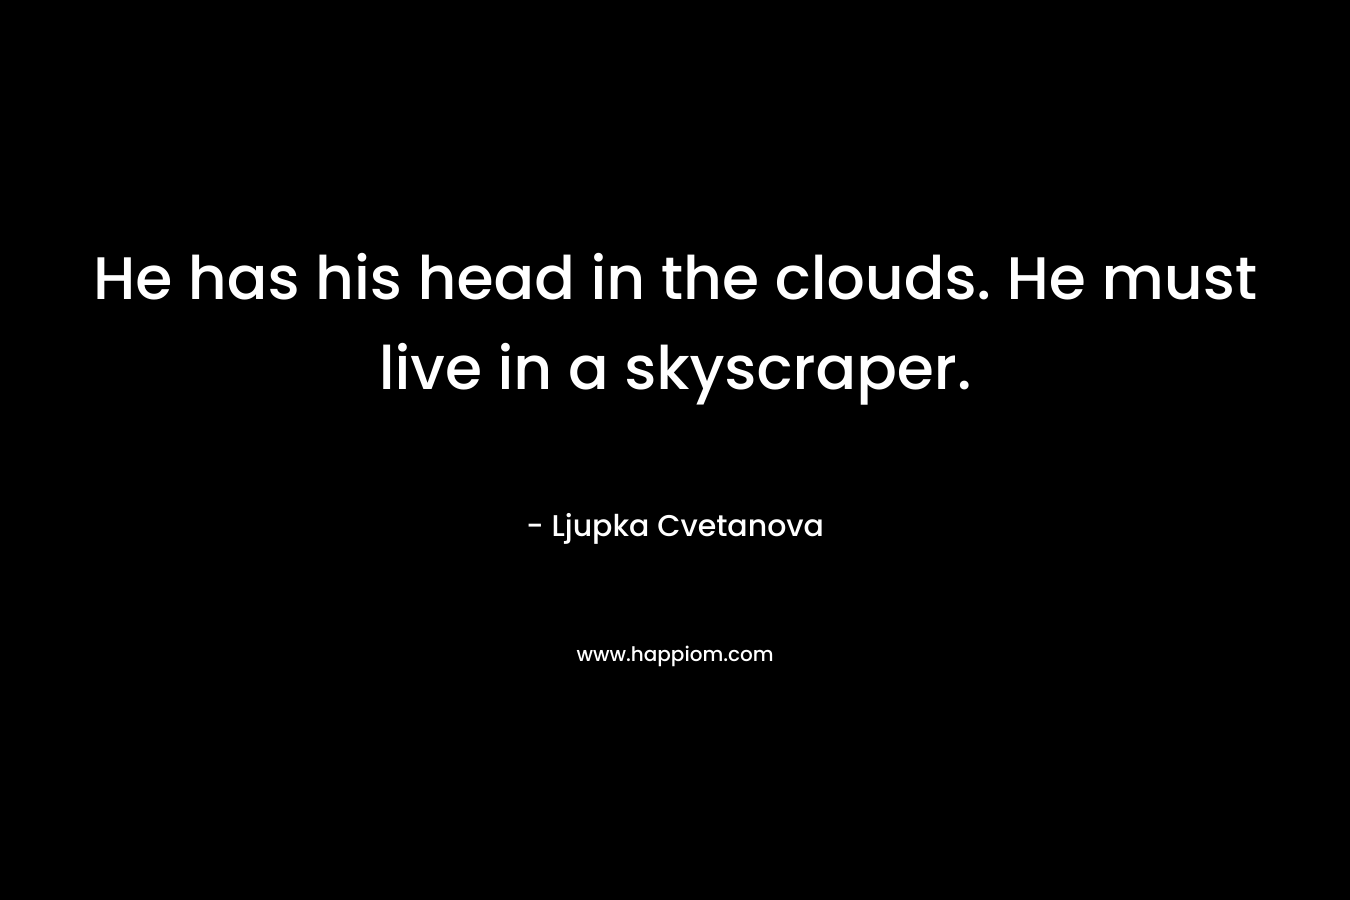 He has his head in the clouds. He must live in a skyscraper.